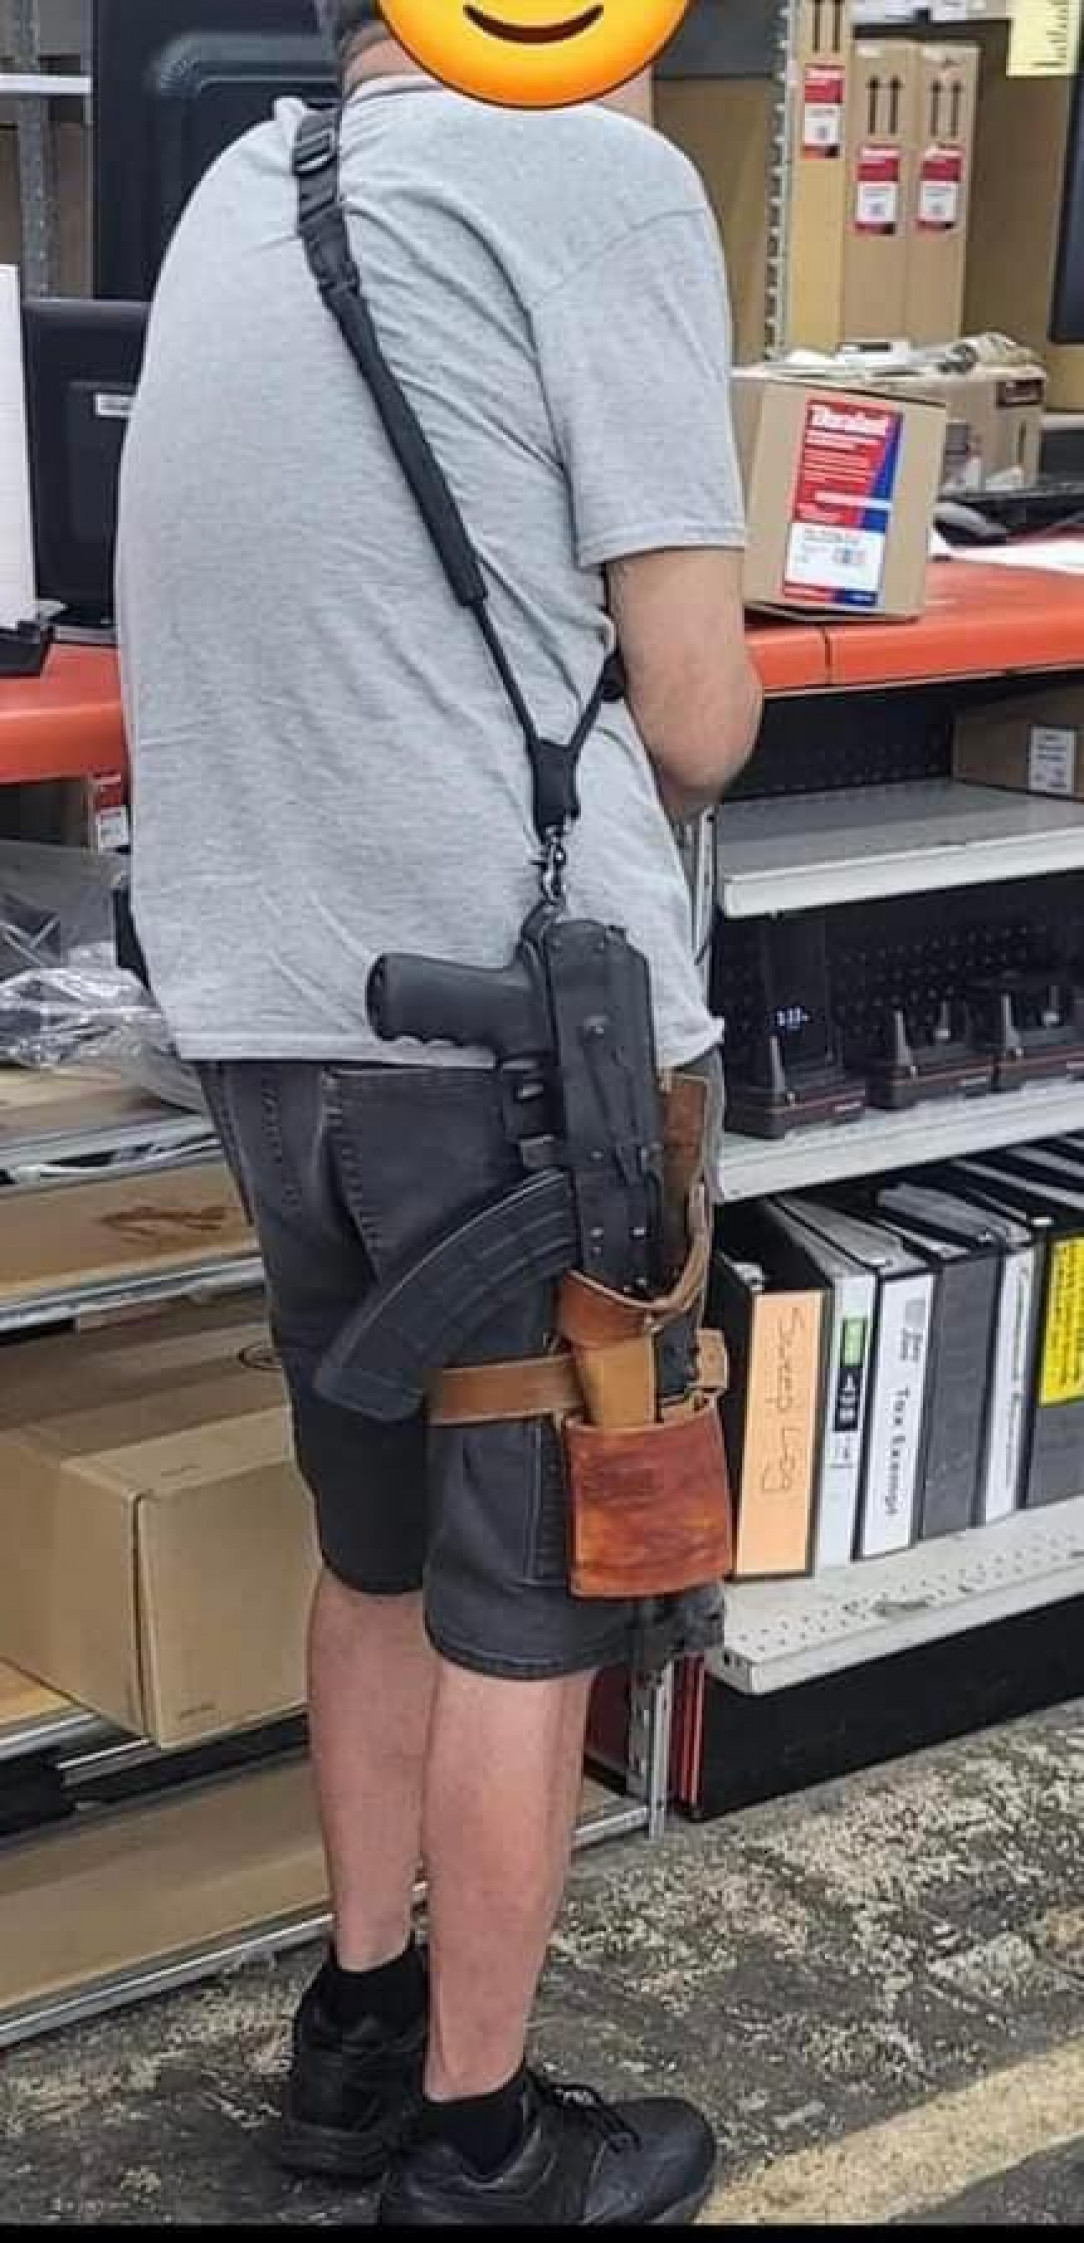 Defender of the auto parts store